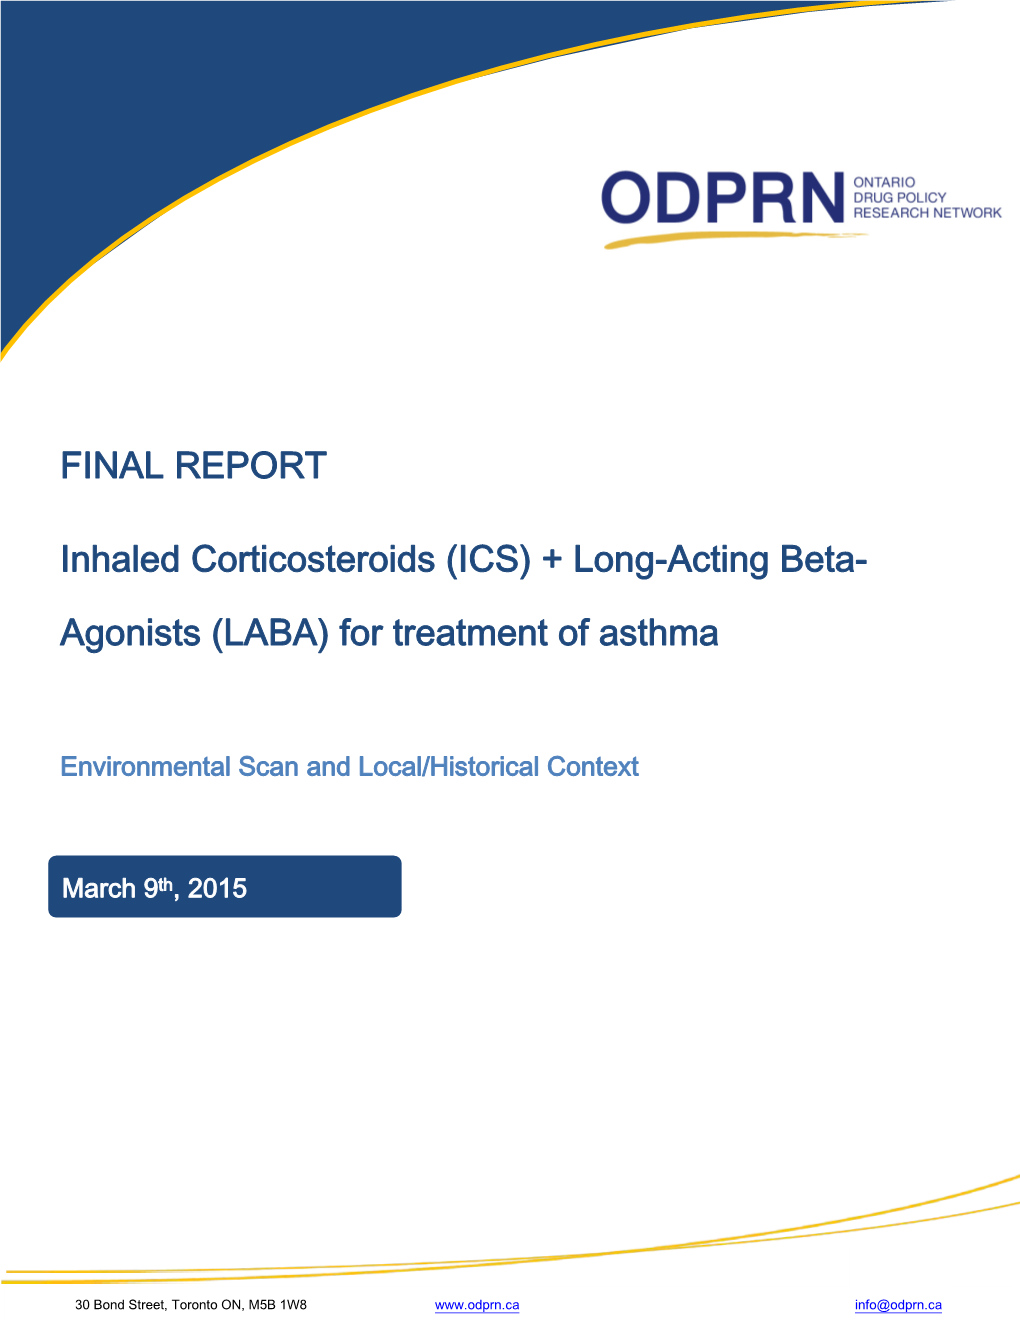 (ICS) + Long-Acting Beta- Agonists (LABA) for Treatment of Asthma